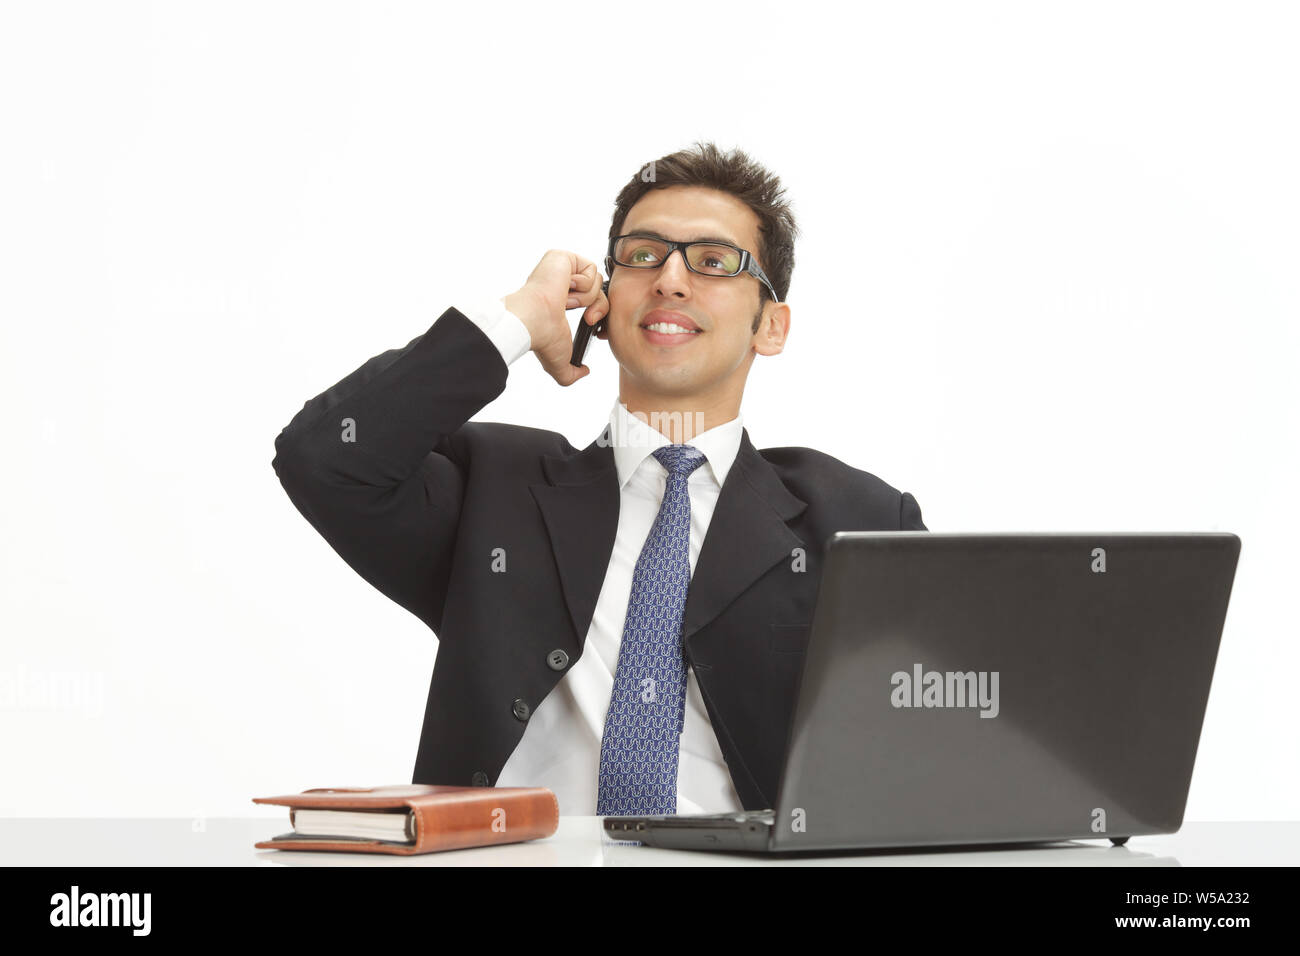 Businessman talking on a mobile phone and smiling Stock Photo